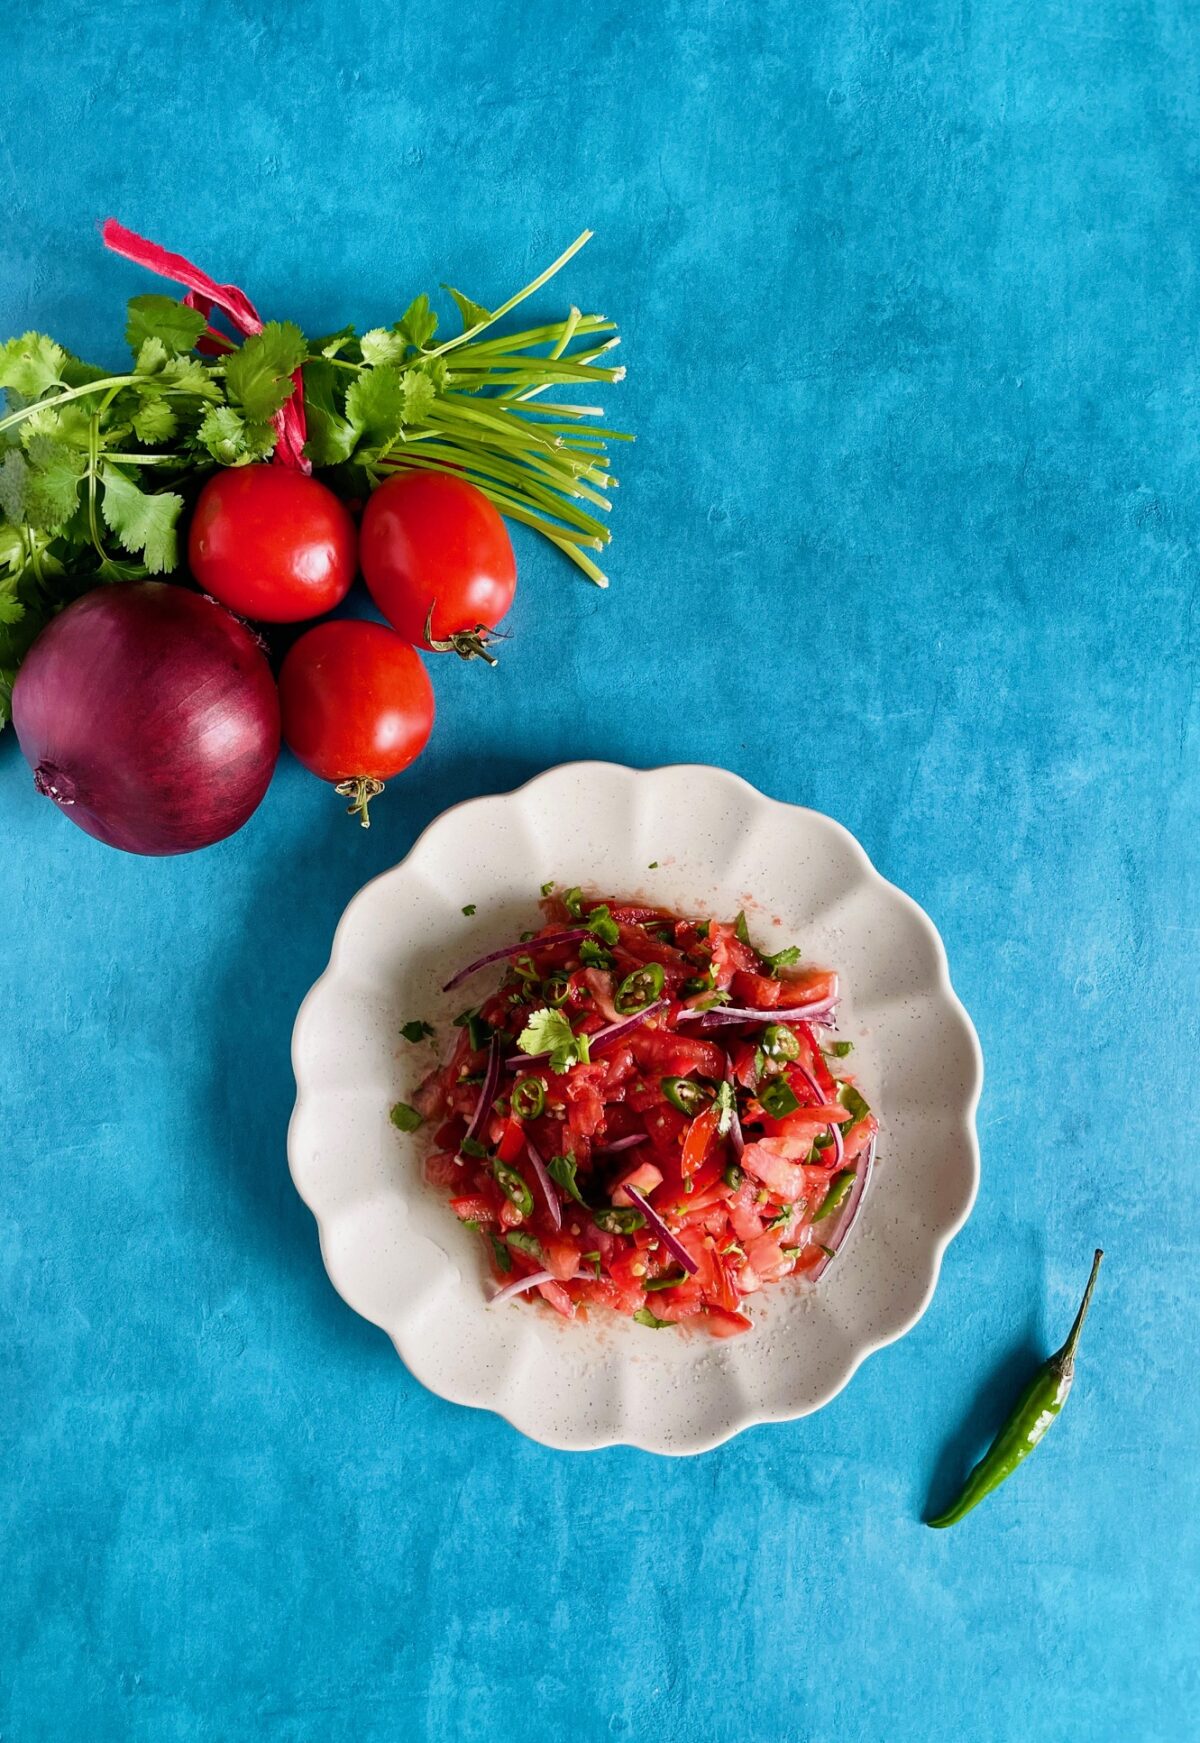 Satini pomme d'amour (Mauritian tomato salad). Sliced tomatoes, chopped green chilies, sliced red onion in a plate with scalloped edges. Whole red onion, bunch of cilantro, and tomatoes in the background.